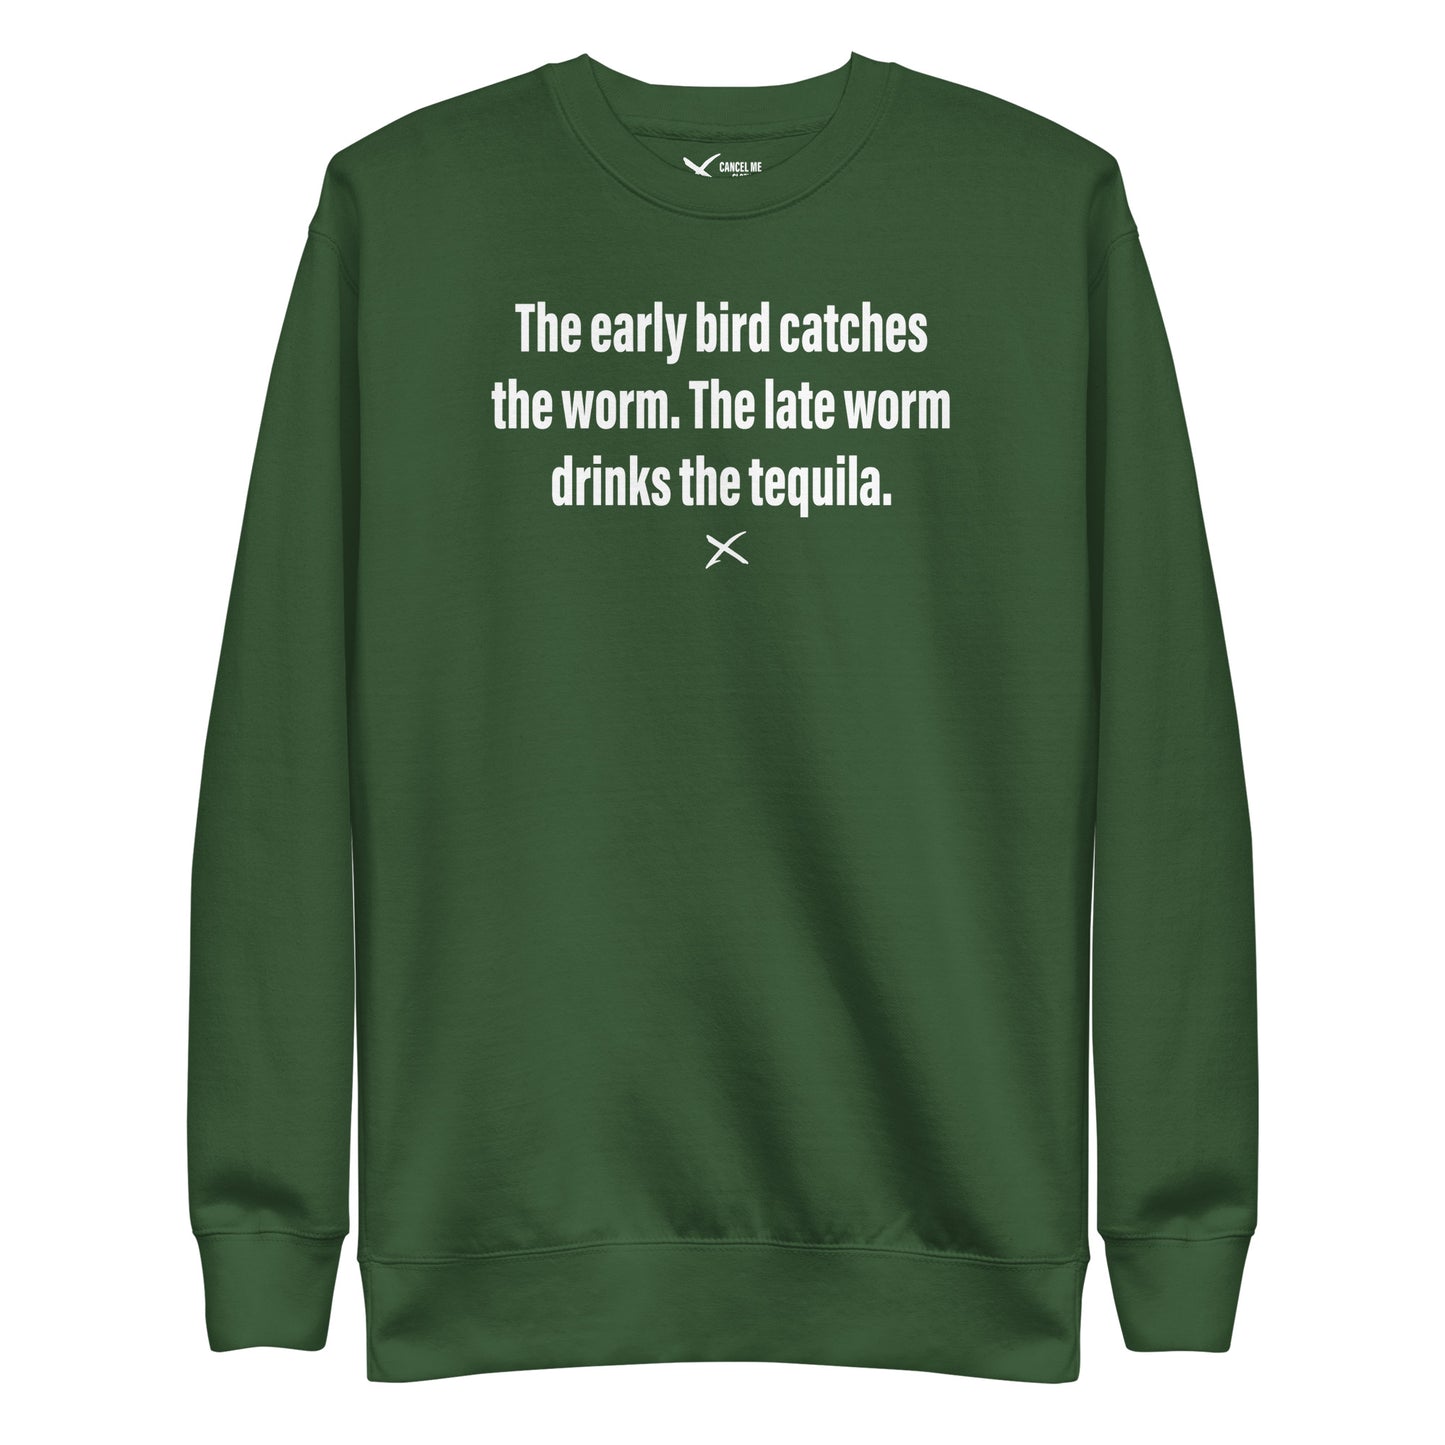 The early bird catches the worm. The late worm drinks the tequila. - Sweatshirt